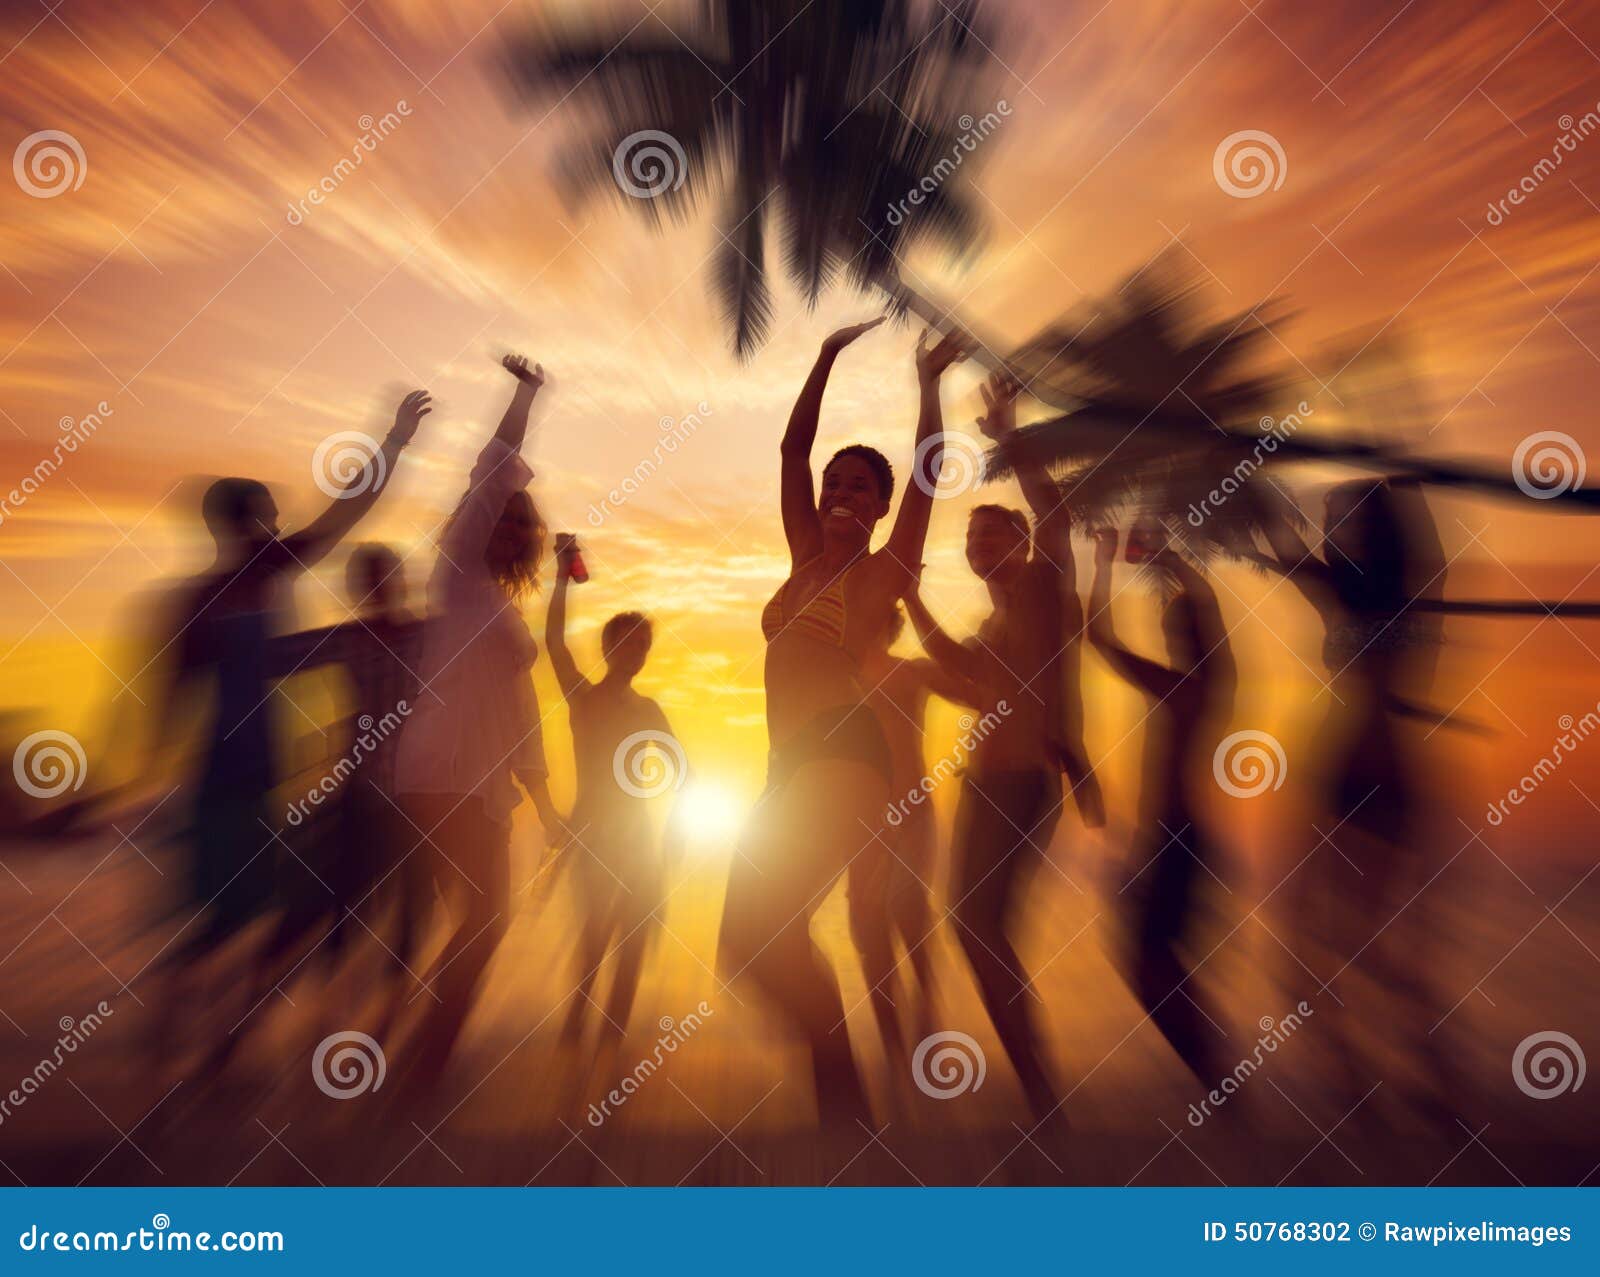 dancing party enjoyment happiness celebration outdoor beach concept